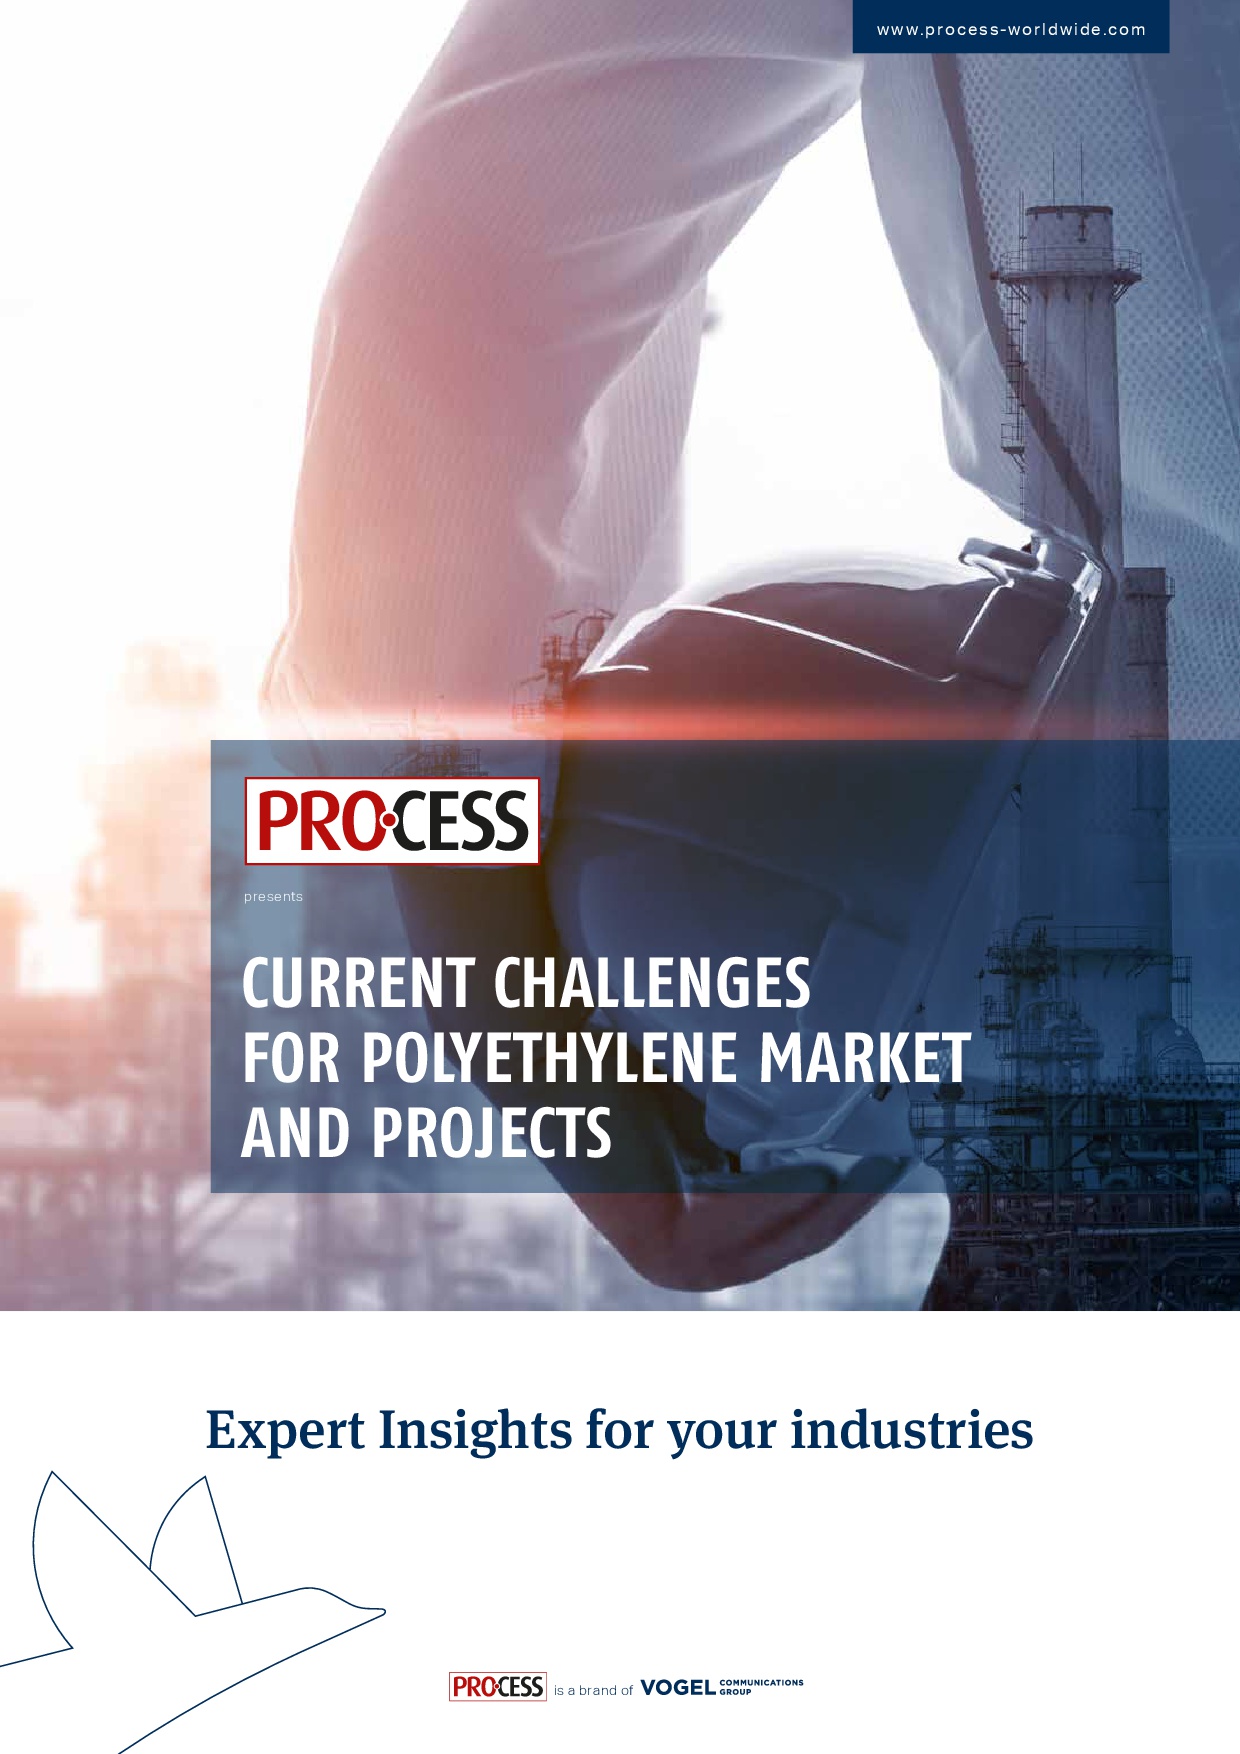 PROCESS Insights: Current Challenges for Polyethylene Market and Projects